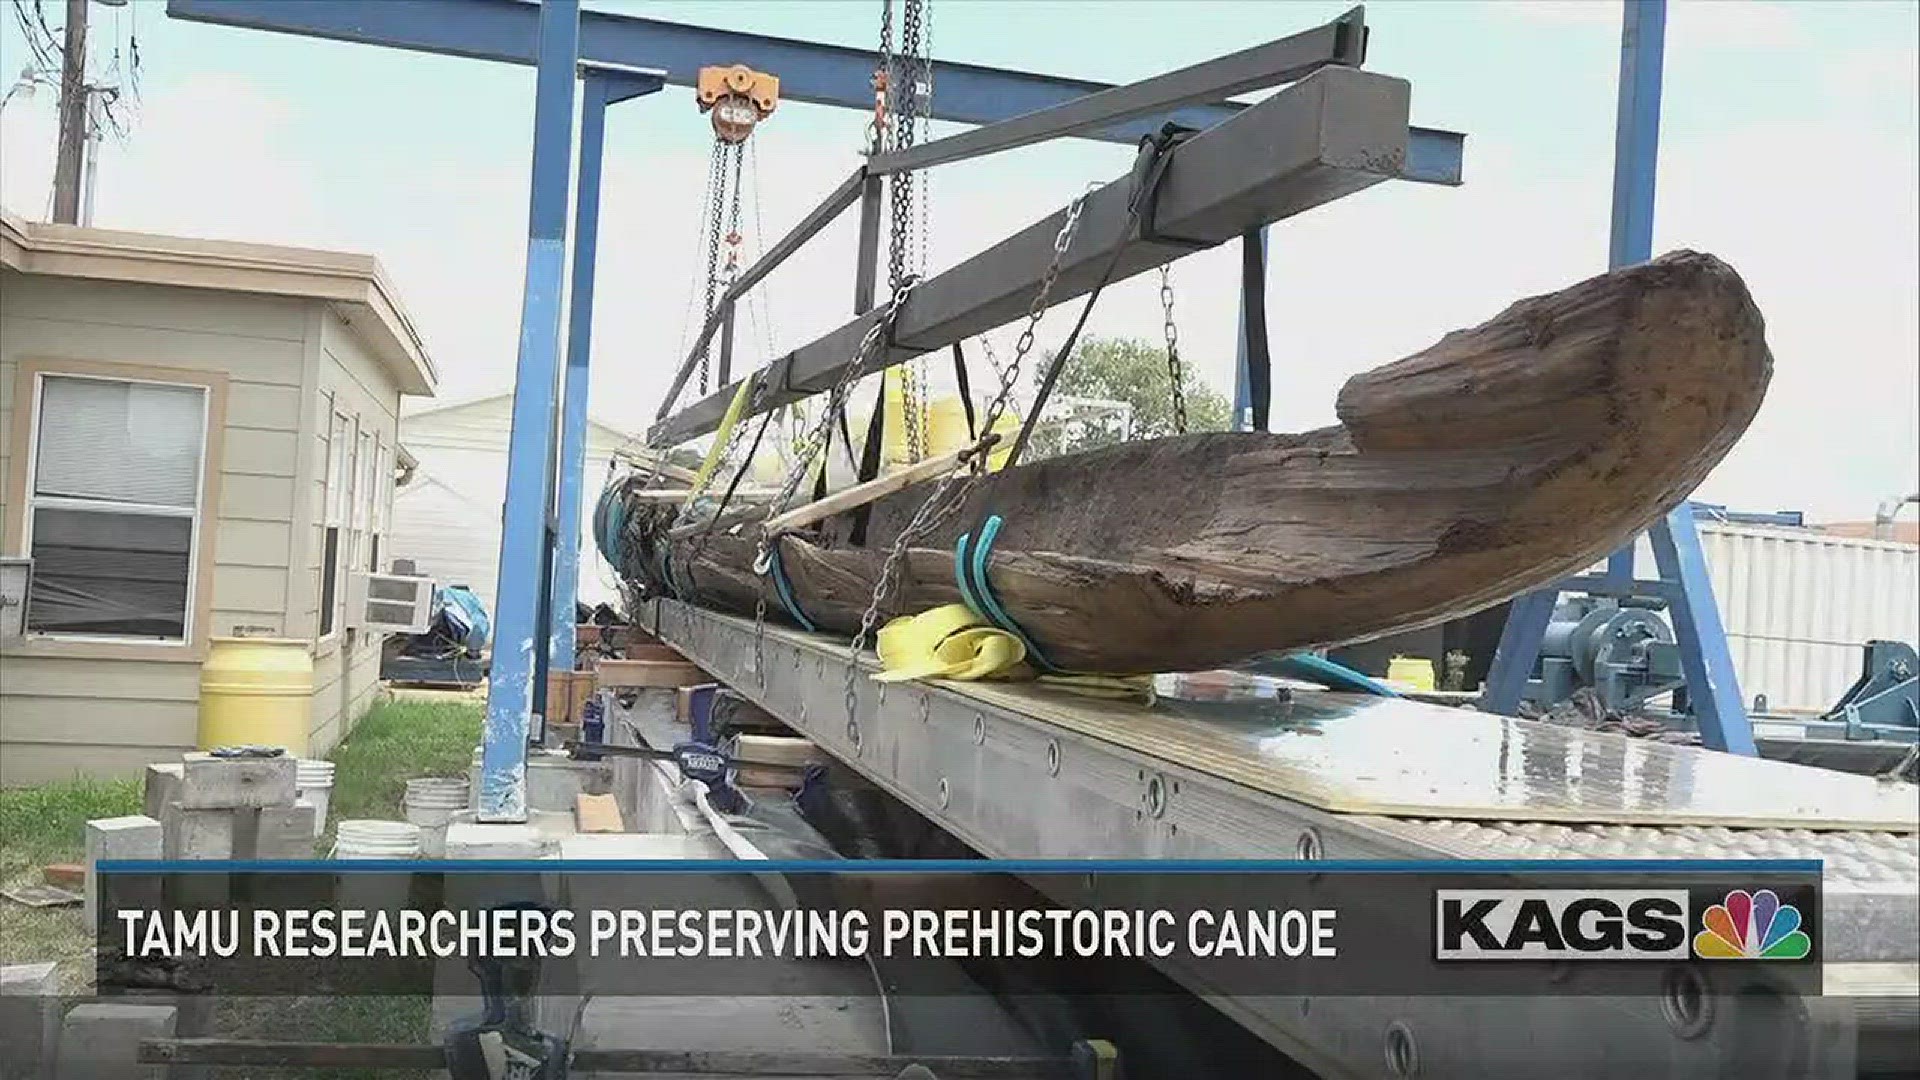 An Aggie team of researchers is restoring 600 year old canoe they believe to be from the Caddo Native Americans.